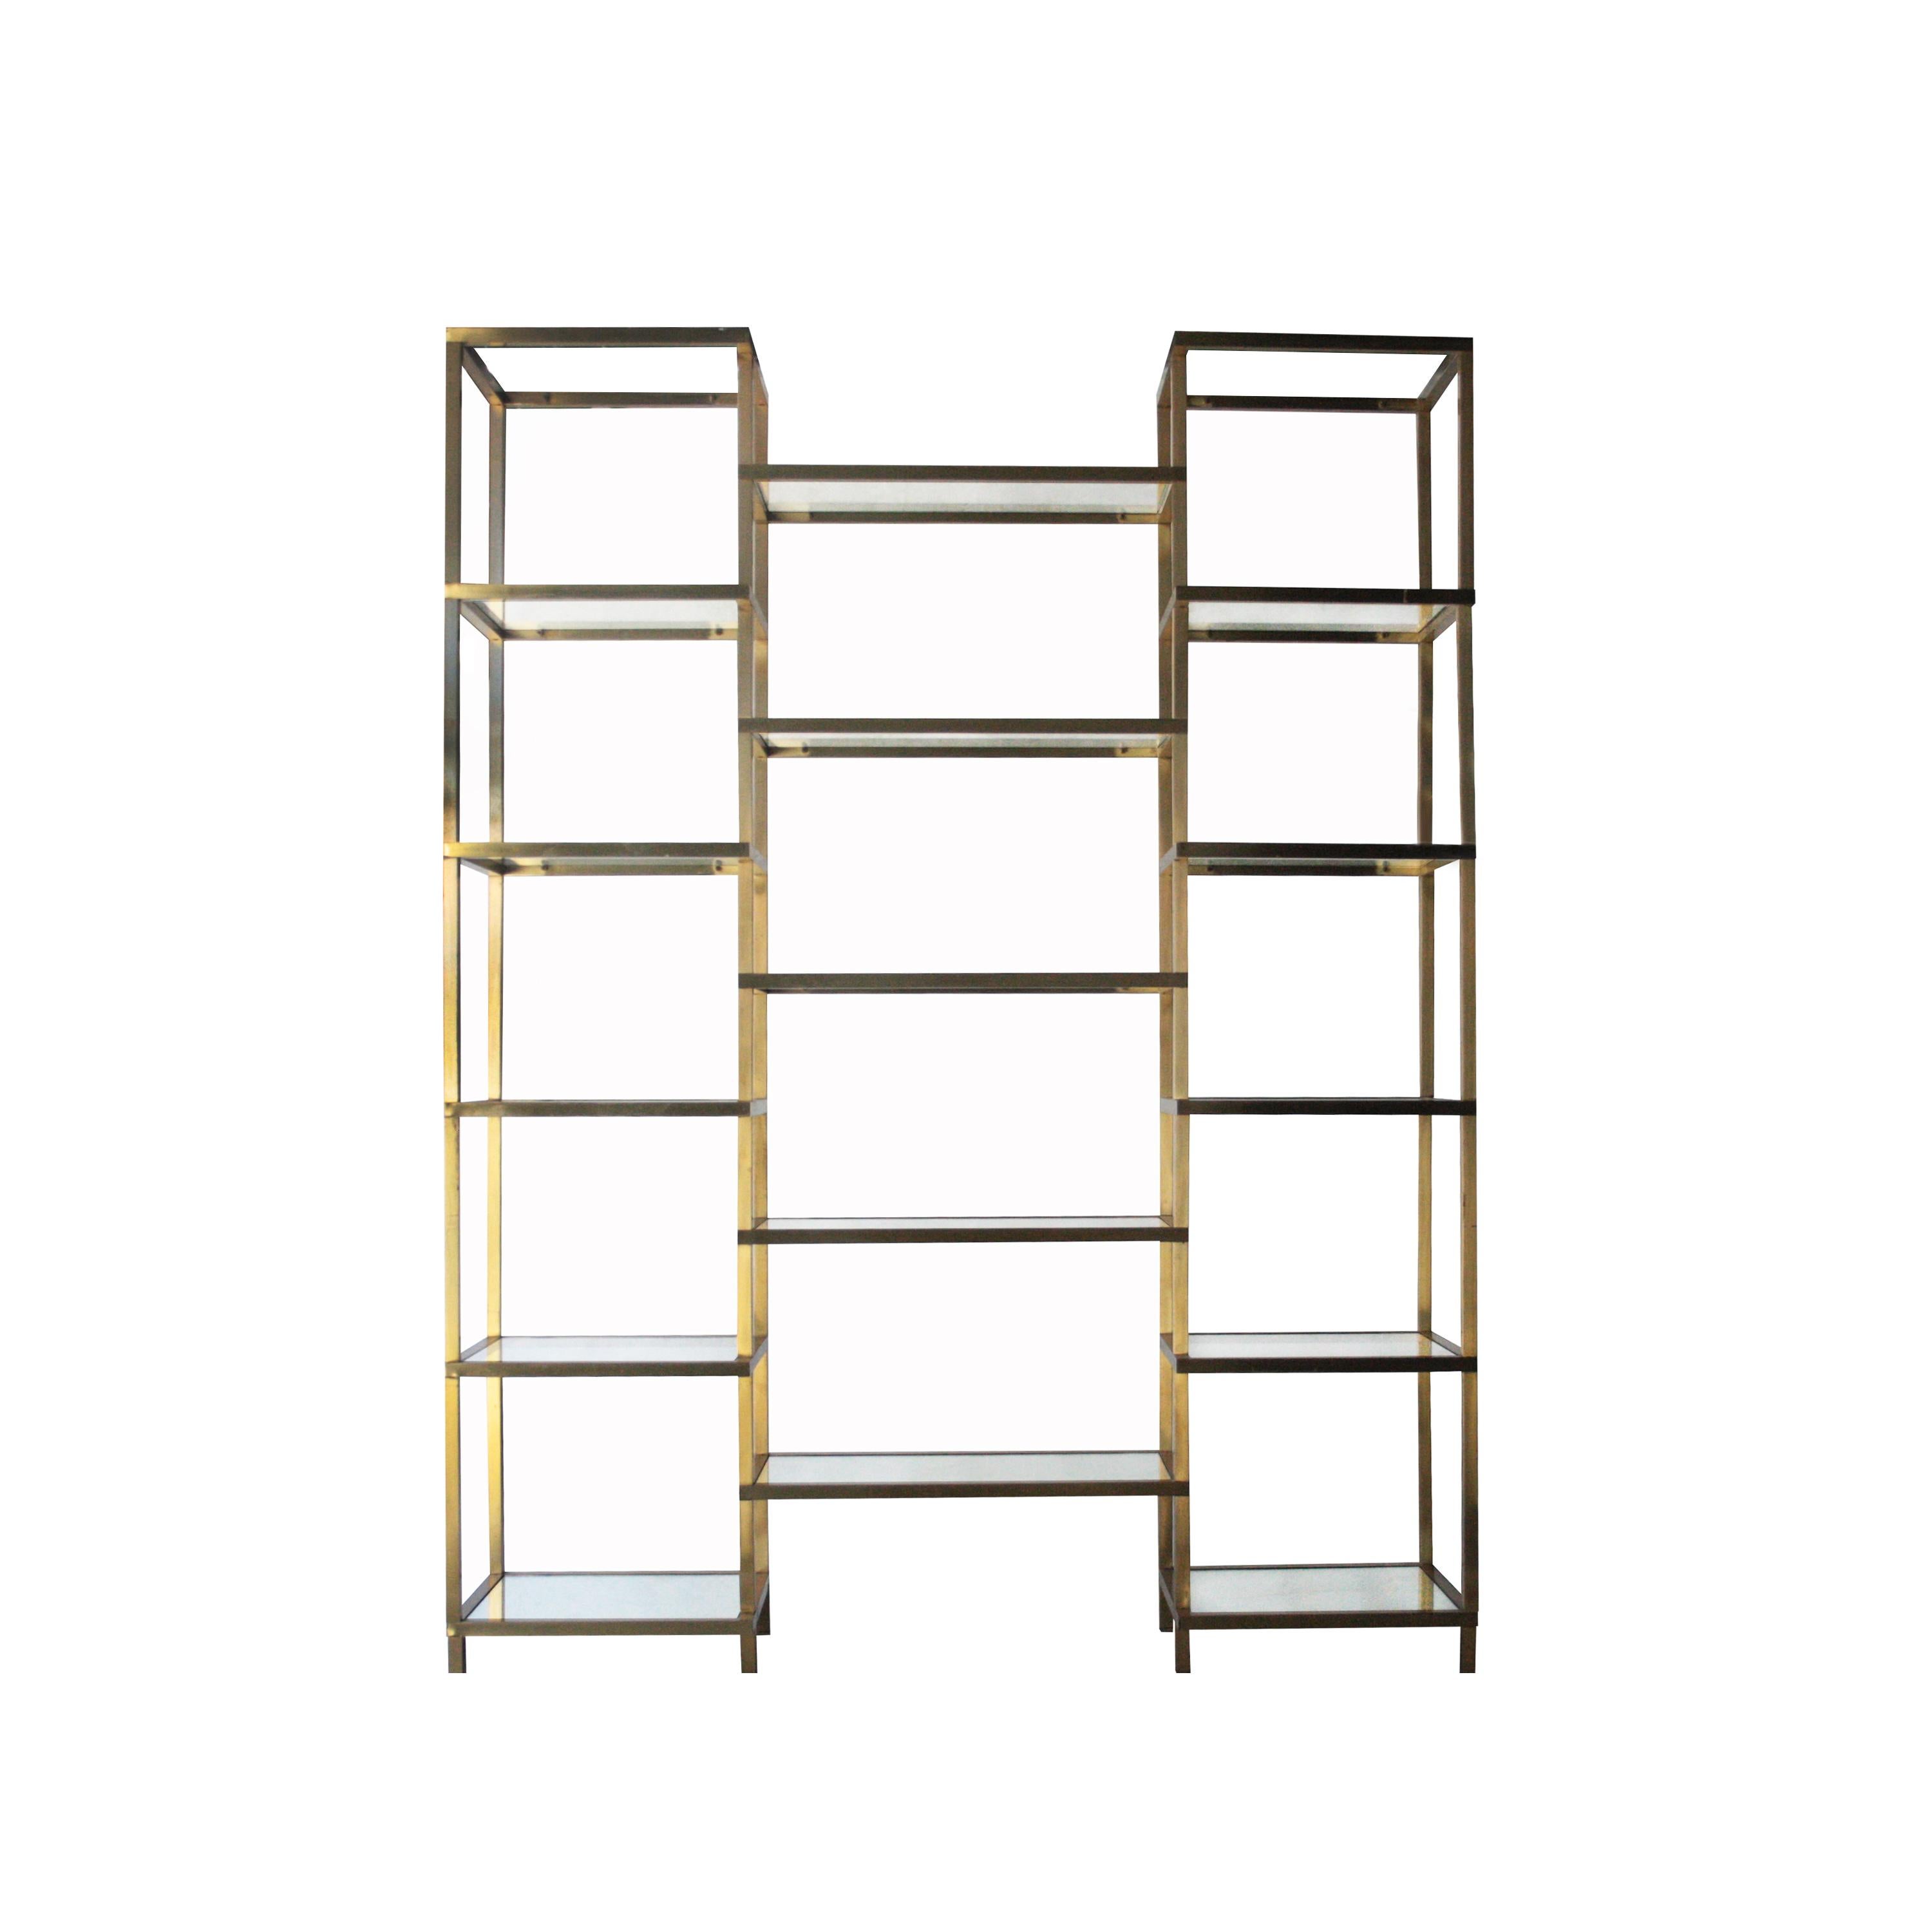 Golden metal shelf, with glass shelves and mirror.